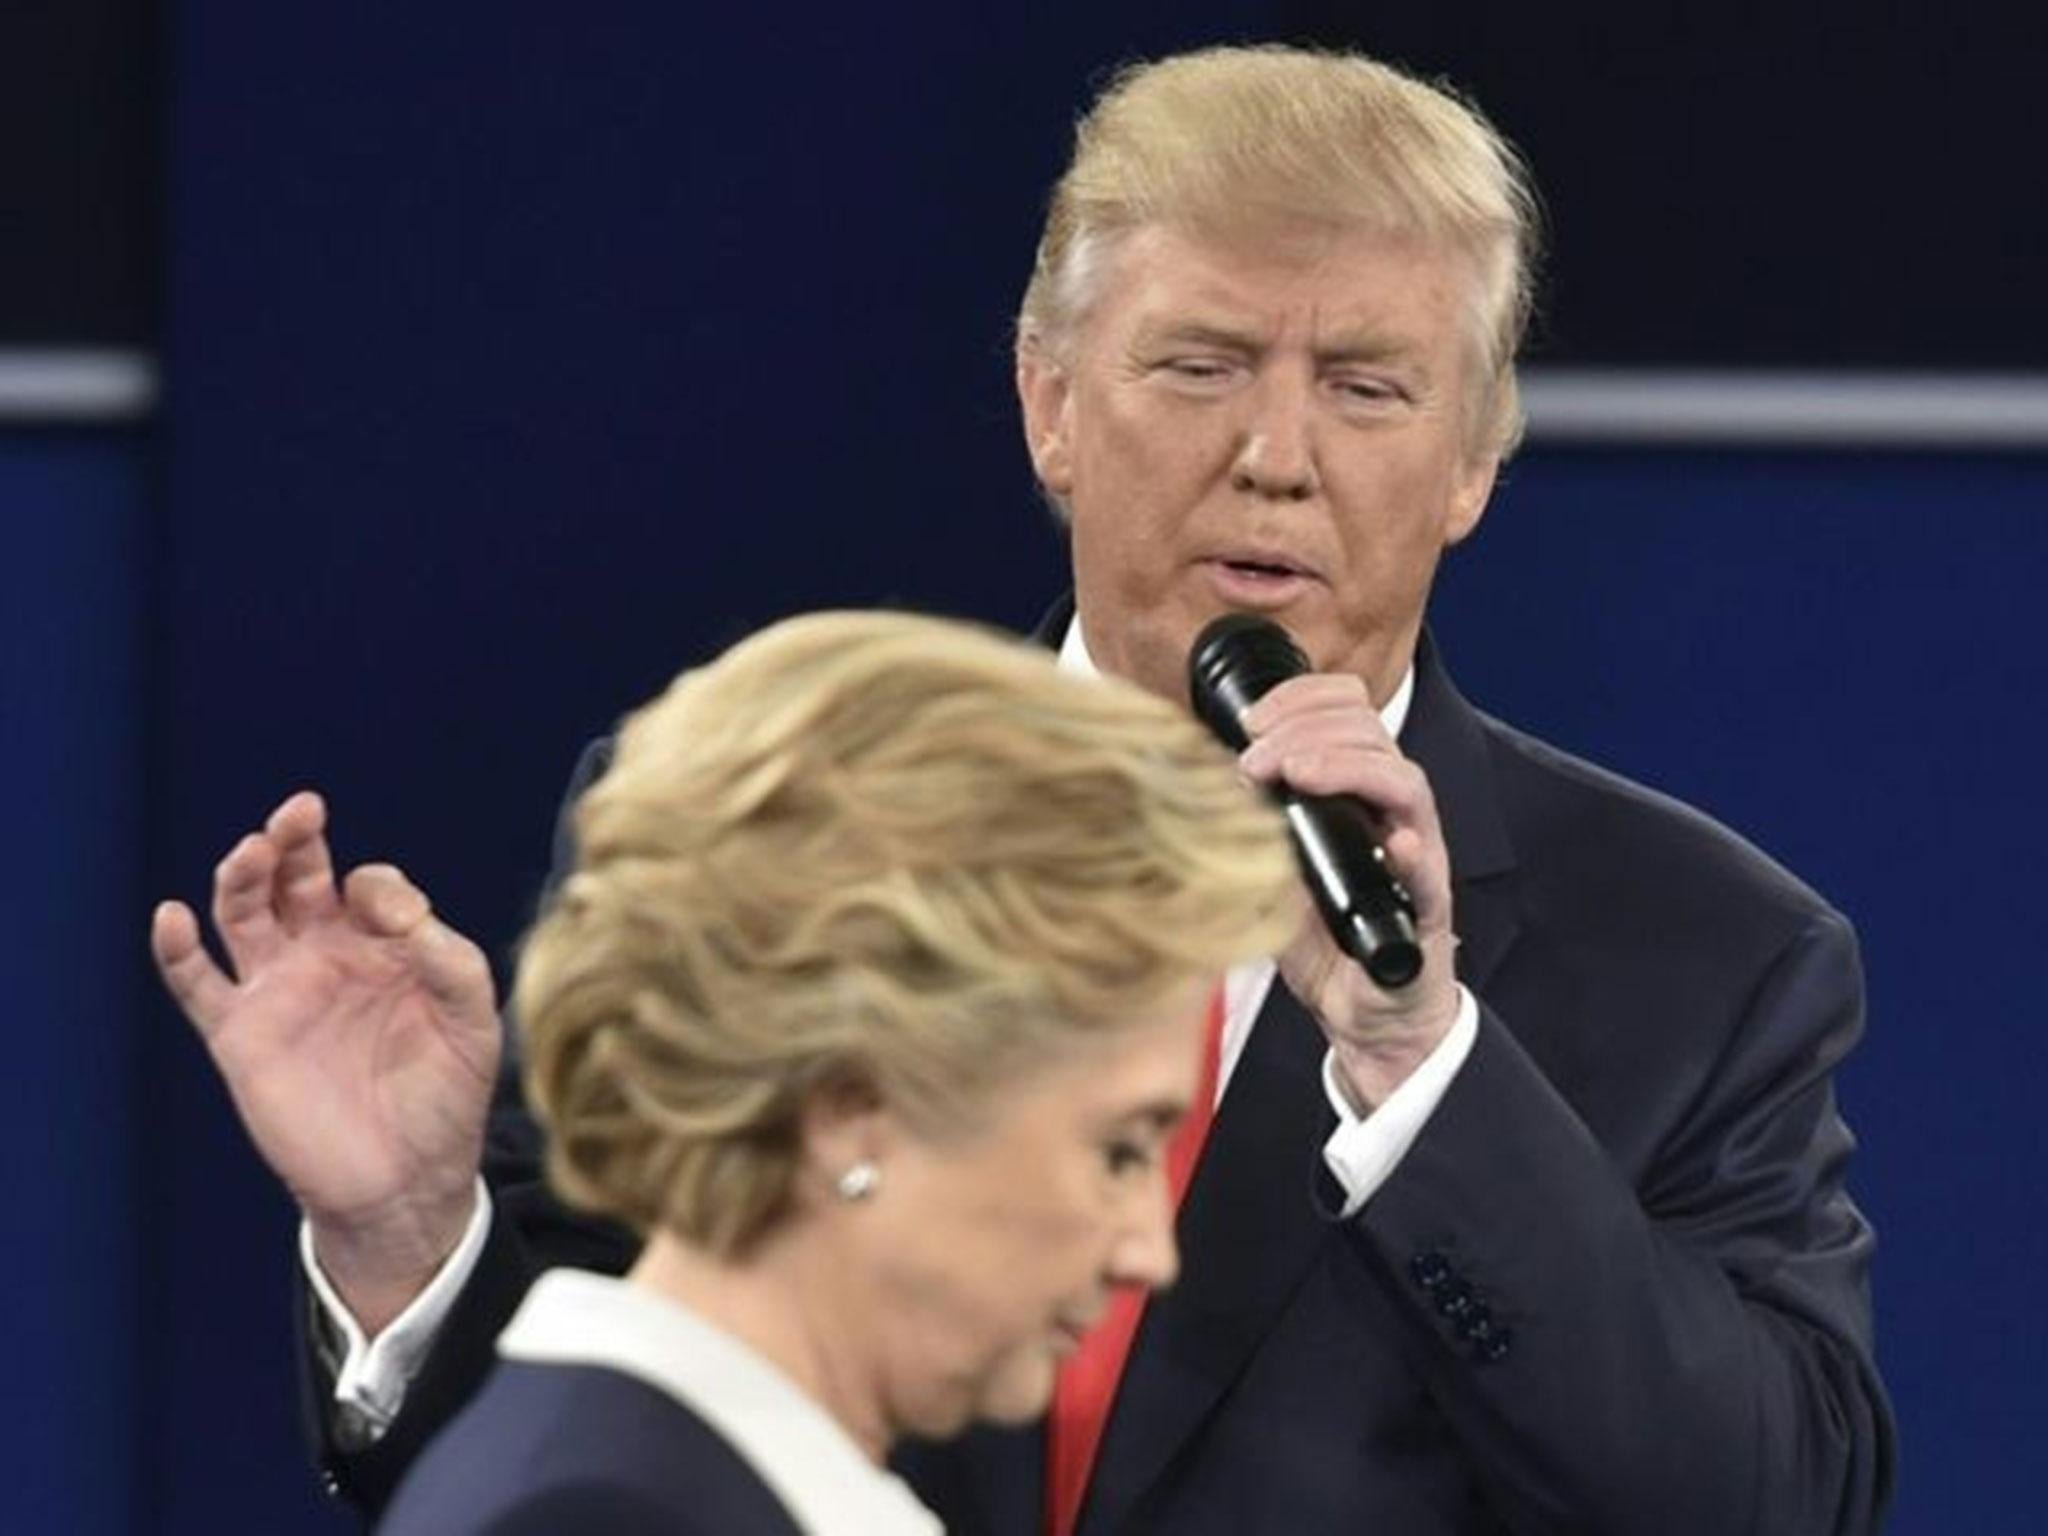 Republican presidential candidate Donald Trump speaks as Democratic presidential candidate Hillary Clinton walks past during the second presidential debate at Washington University in St. Louis, Missouri on 9 October, 2016